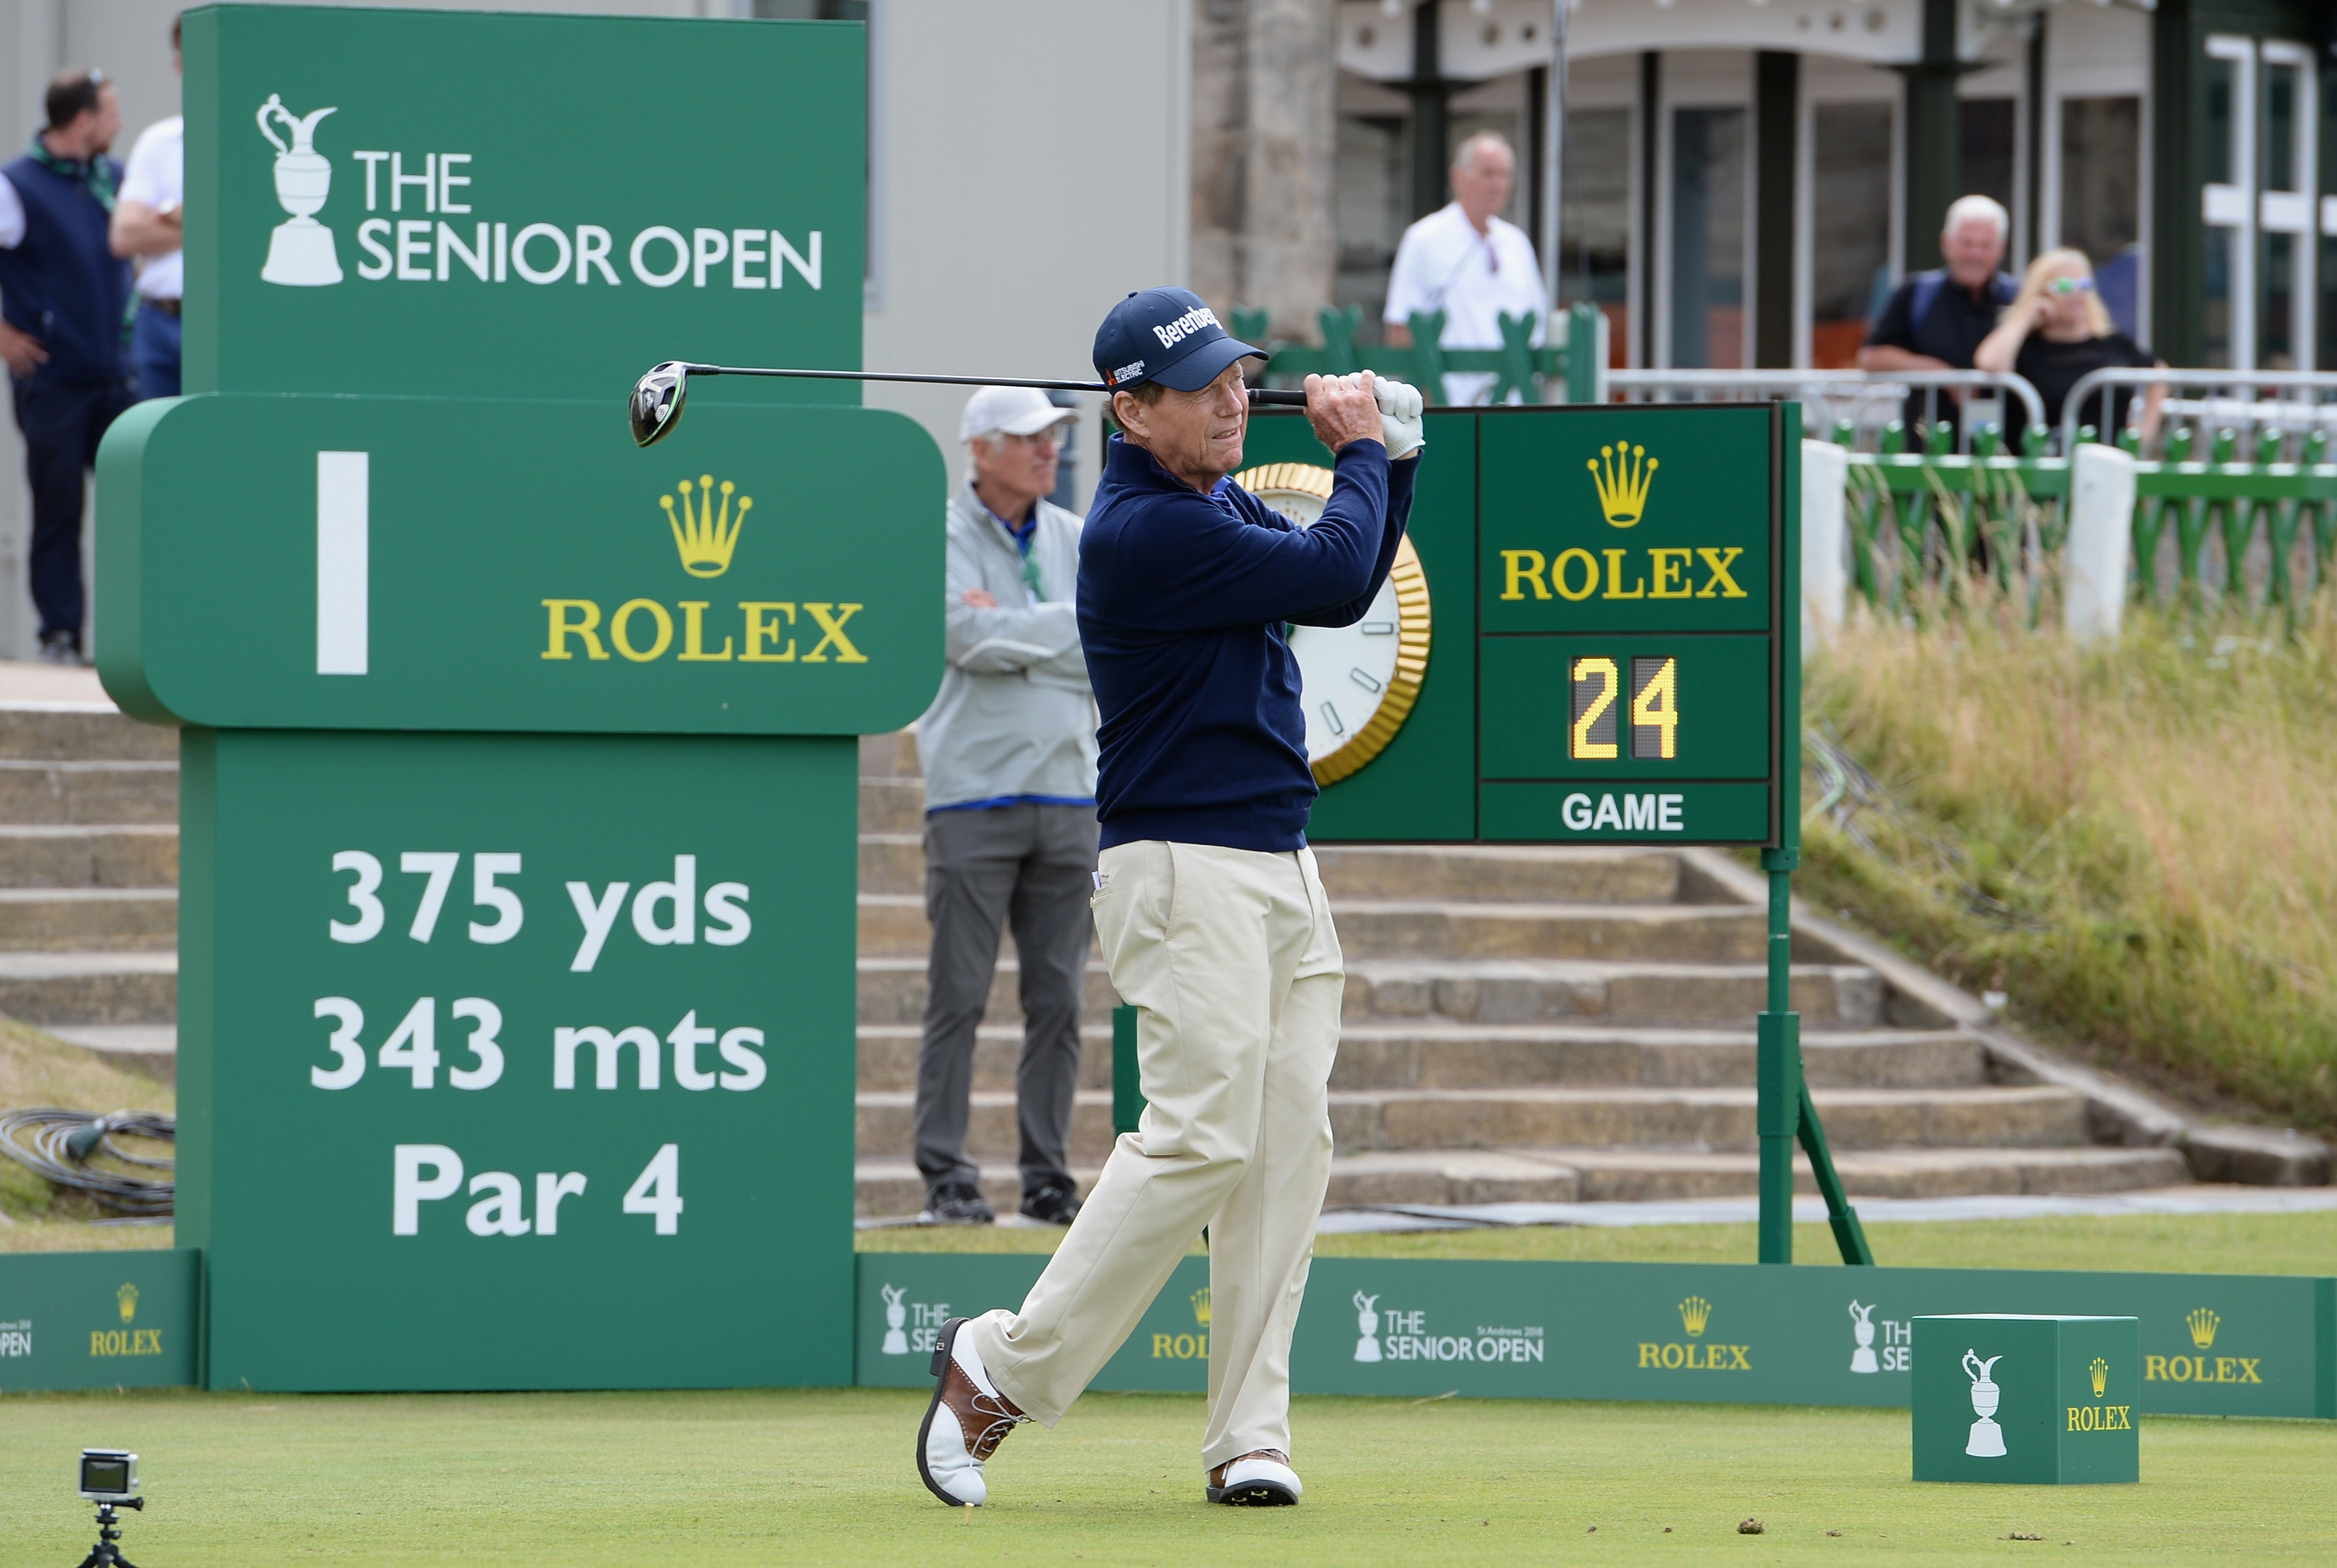 Tom Watson hits from the first in practice for the Senior Open at St Andrews.